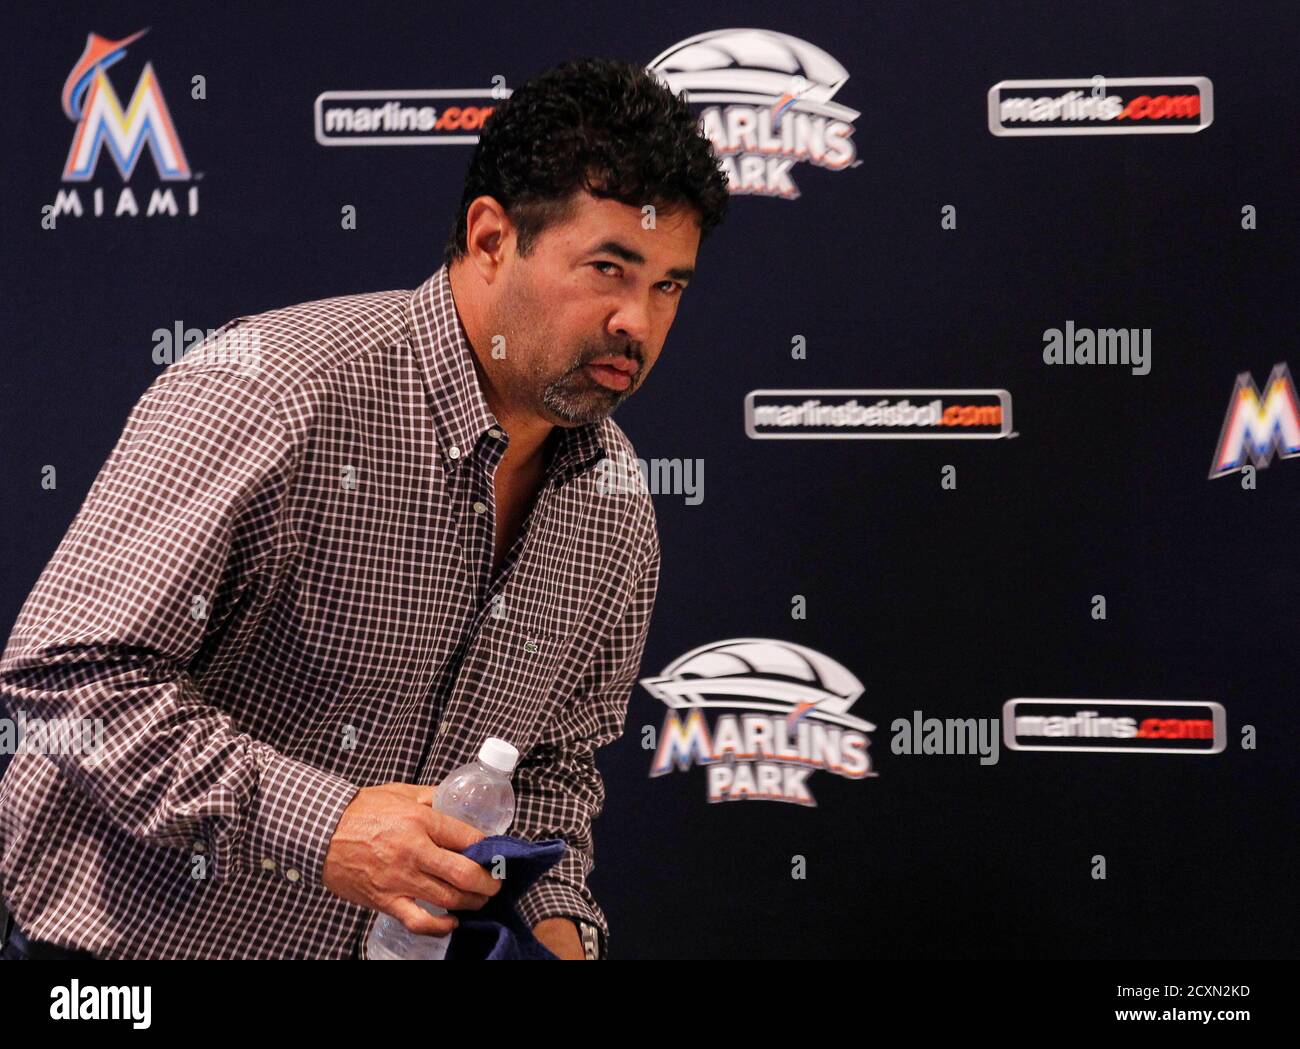 Miami Marlins manager Ozzie Guillen speaks at a news conference at Marlins Park in Miami, Florida April 10, 2012. The Miami Marlins baseball team suspended manager Ozzie Guillen for five games after he praised Cuba's Fidel Castro in a magazine interview. REUTERS/Joe Skipper (UNITED STATES  - Tags: SPORT BASEBALL) Stock Photo